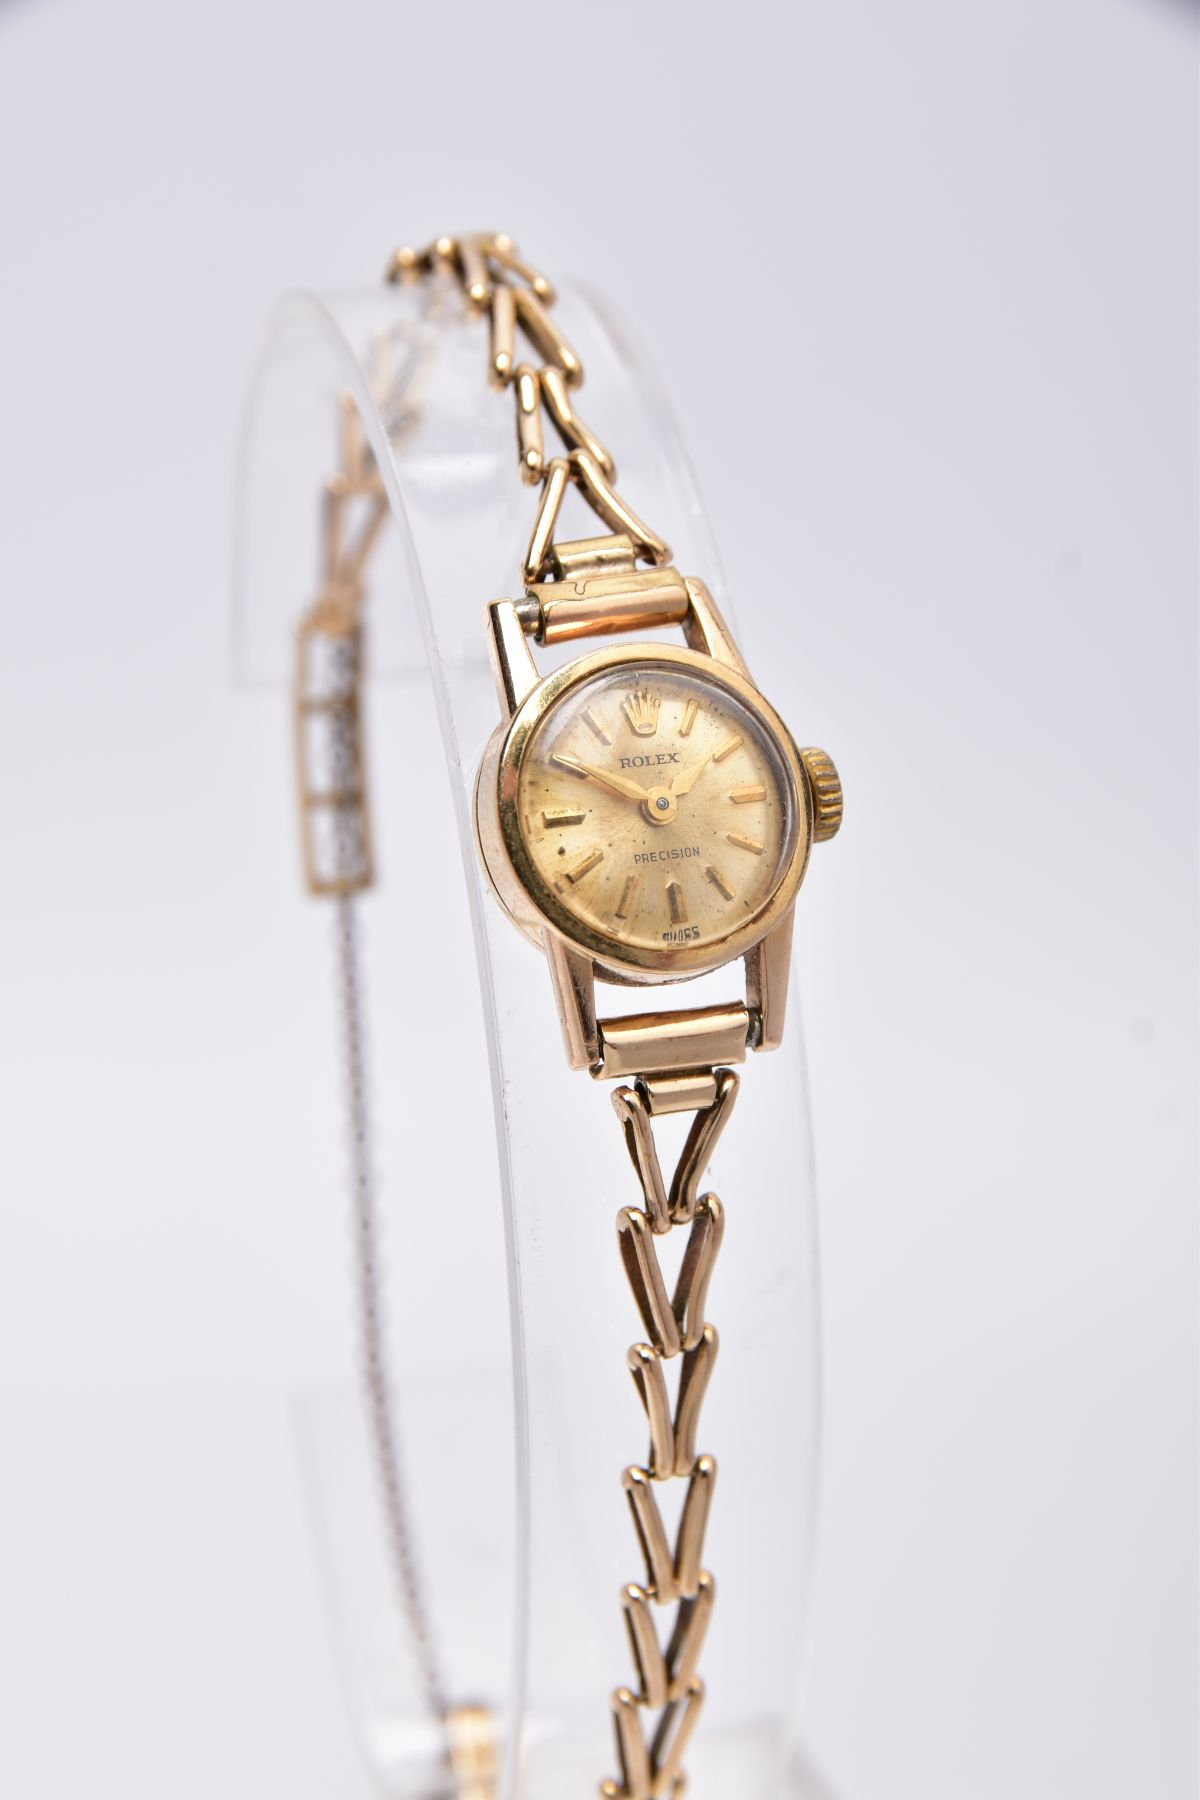 A LADIES 9CT GOLD ROLEX PRECISION WRISTWATCH, round case measuring approximately 16mm in diameter, - Image 2 of 6